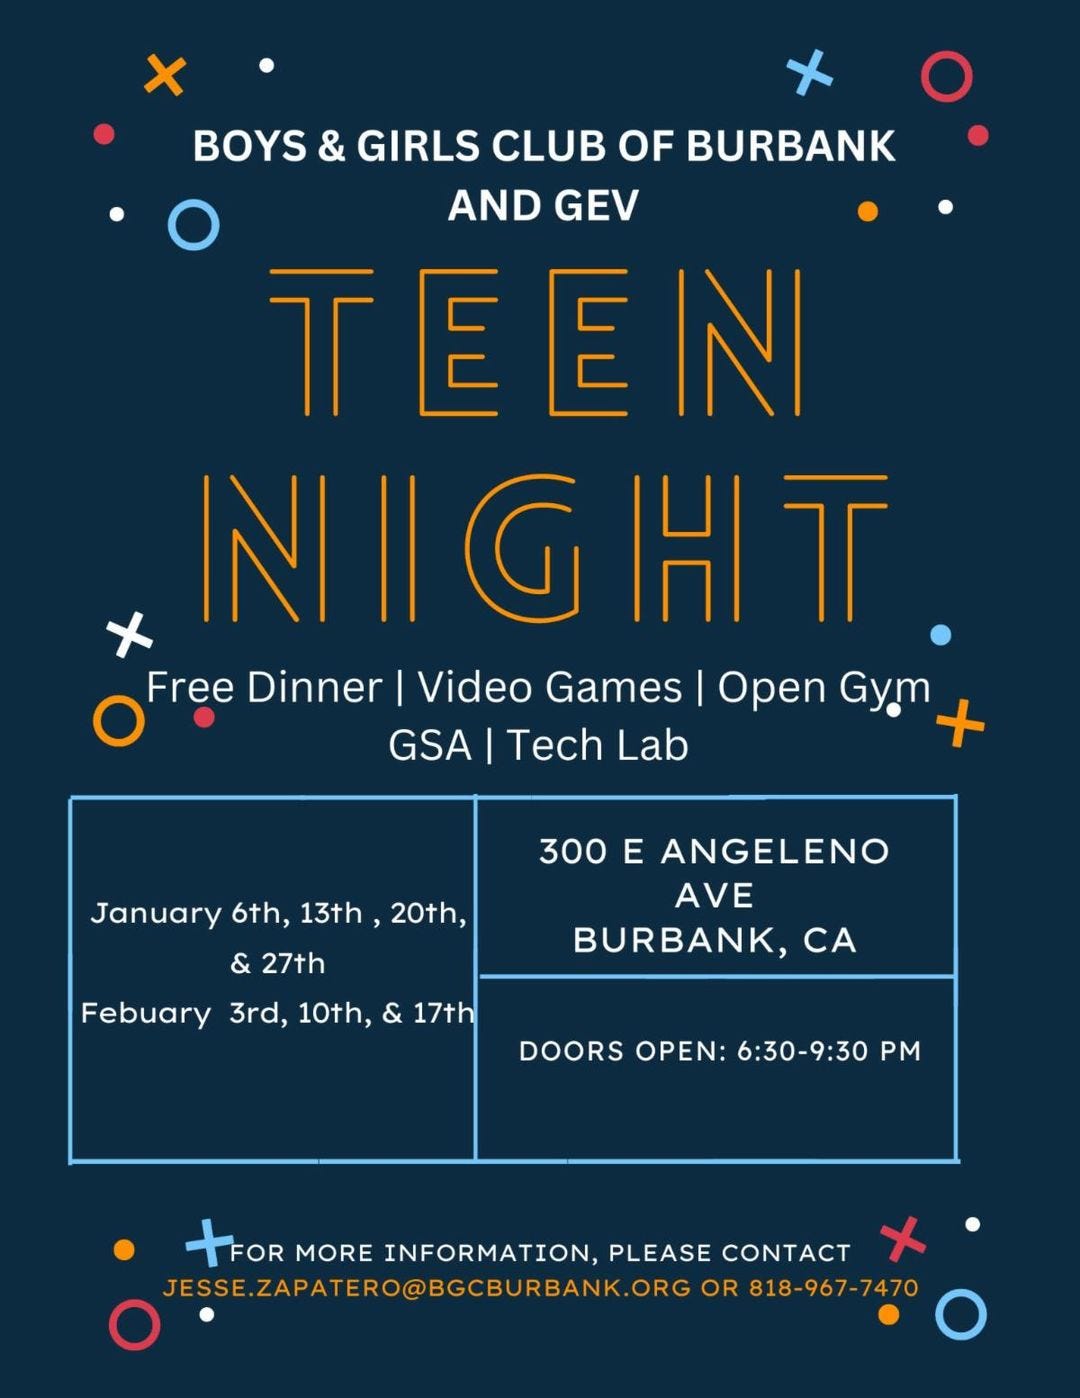 May be an image of text that says 'BOYS & GIRLS CLUB OF BURBANK AND GEV TEEIN NHIGHT Free Dinner Video Games Dinner Open Gym GSA Tech Lab January 6th, 13th, 20th, & 27th Febuary 3rd, 10th, & 17th 300 E ANGELENO AVE BURBANK, CA DOORS OPEN: 6:30-9:30 PM +FOR FOR MORE INFORMATION, PLEASE CONTACT JESSE.ZAPATERO@BGCBURBANK.ORG 818-967-7470'